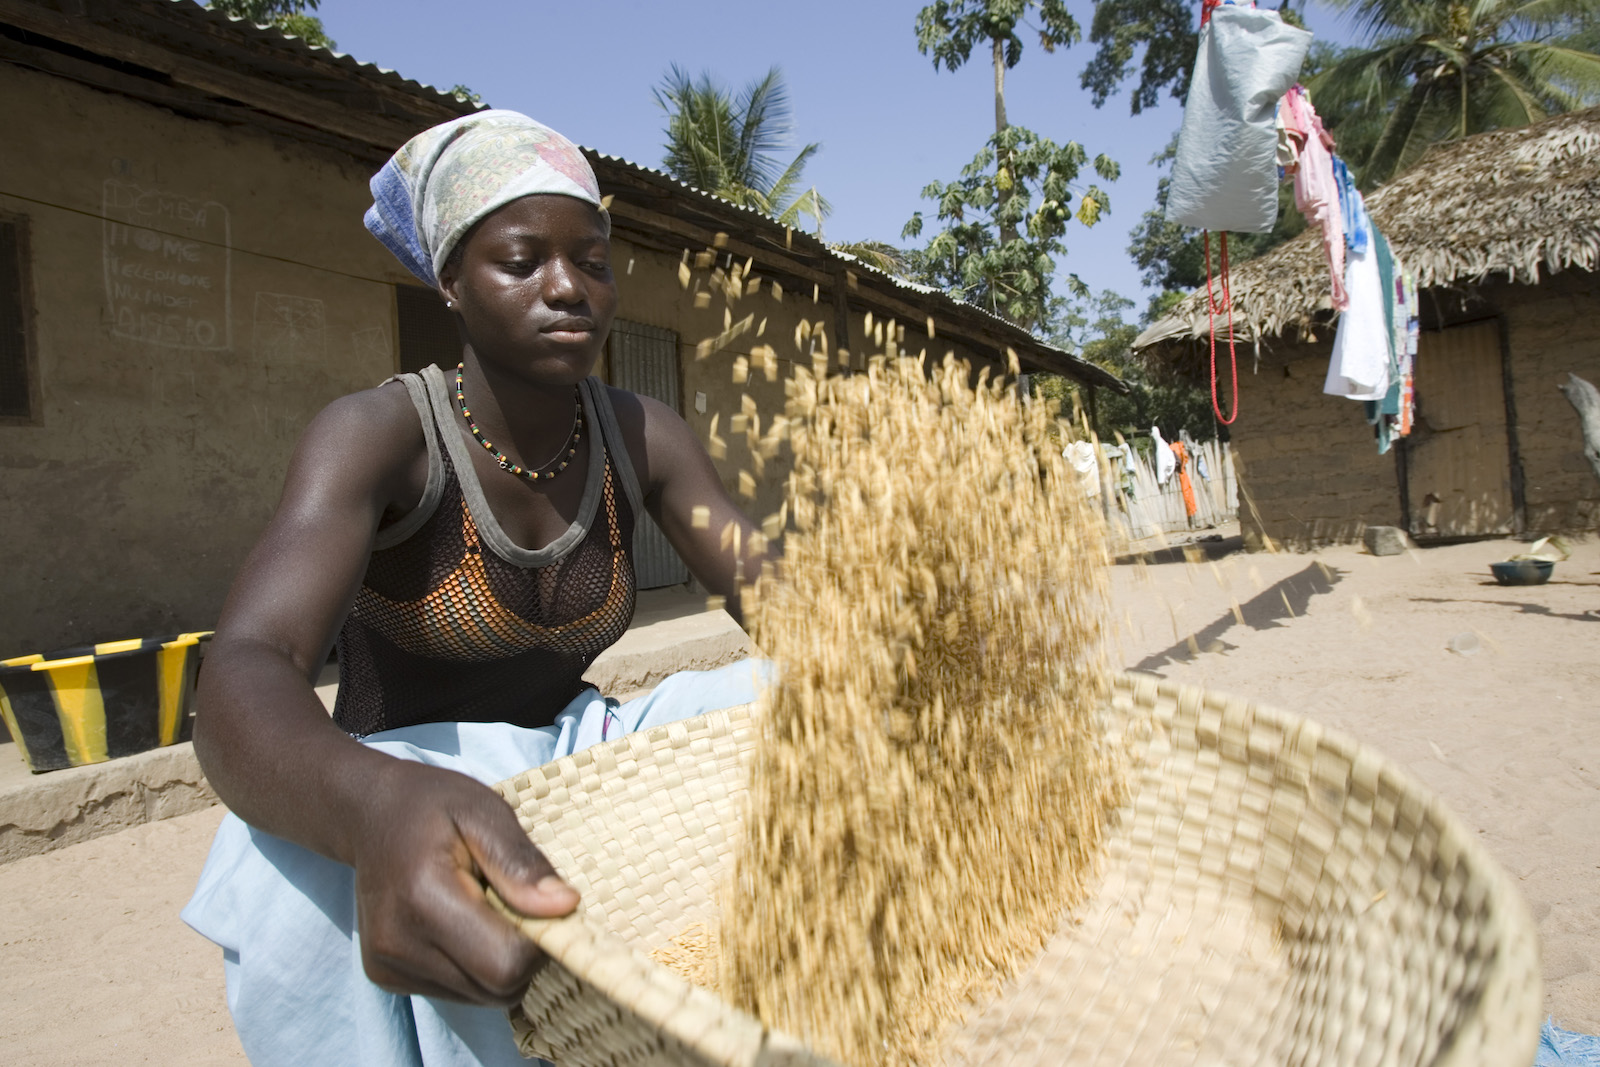 Young woman uses traditional basket to winnow and clean brown husk rice Berending village The Gambia